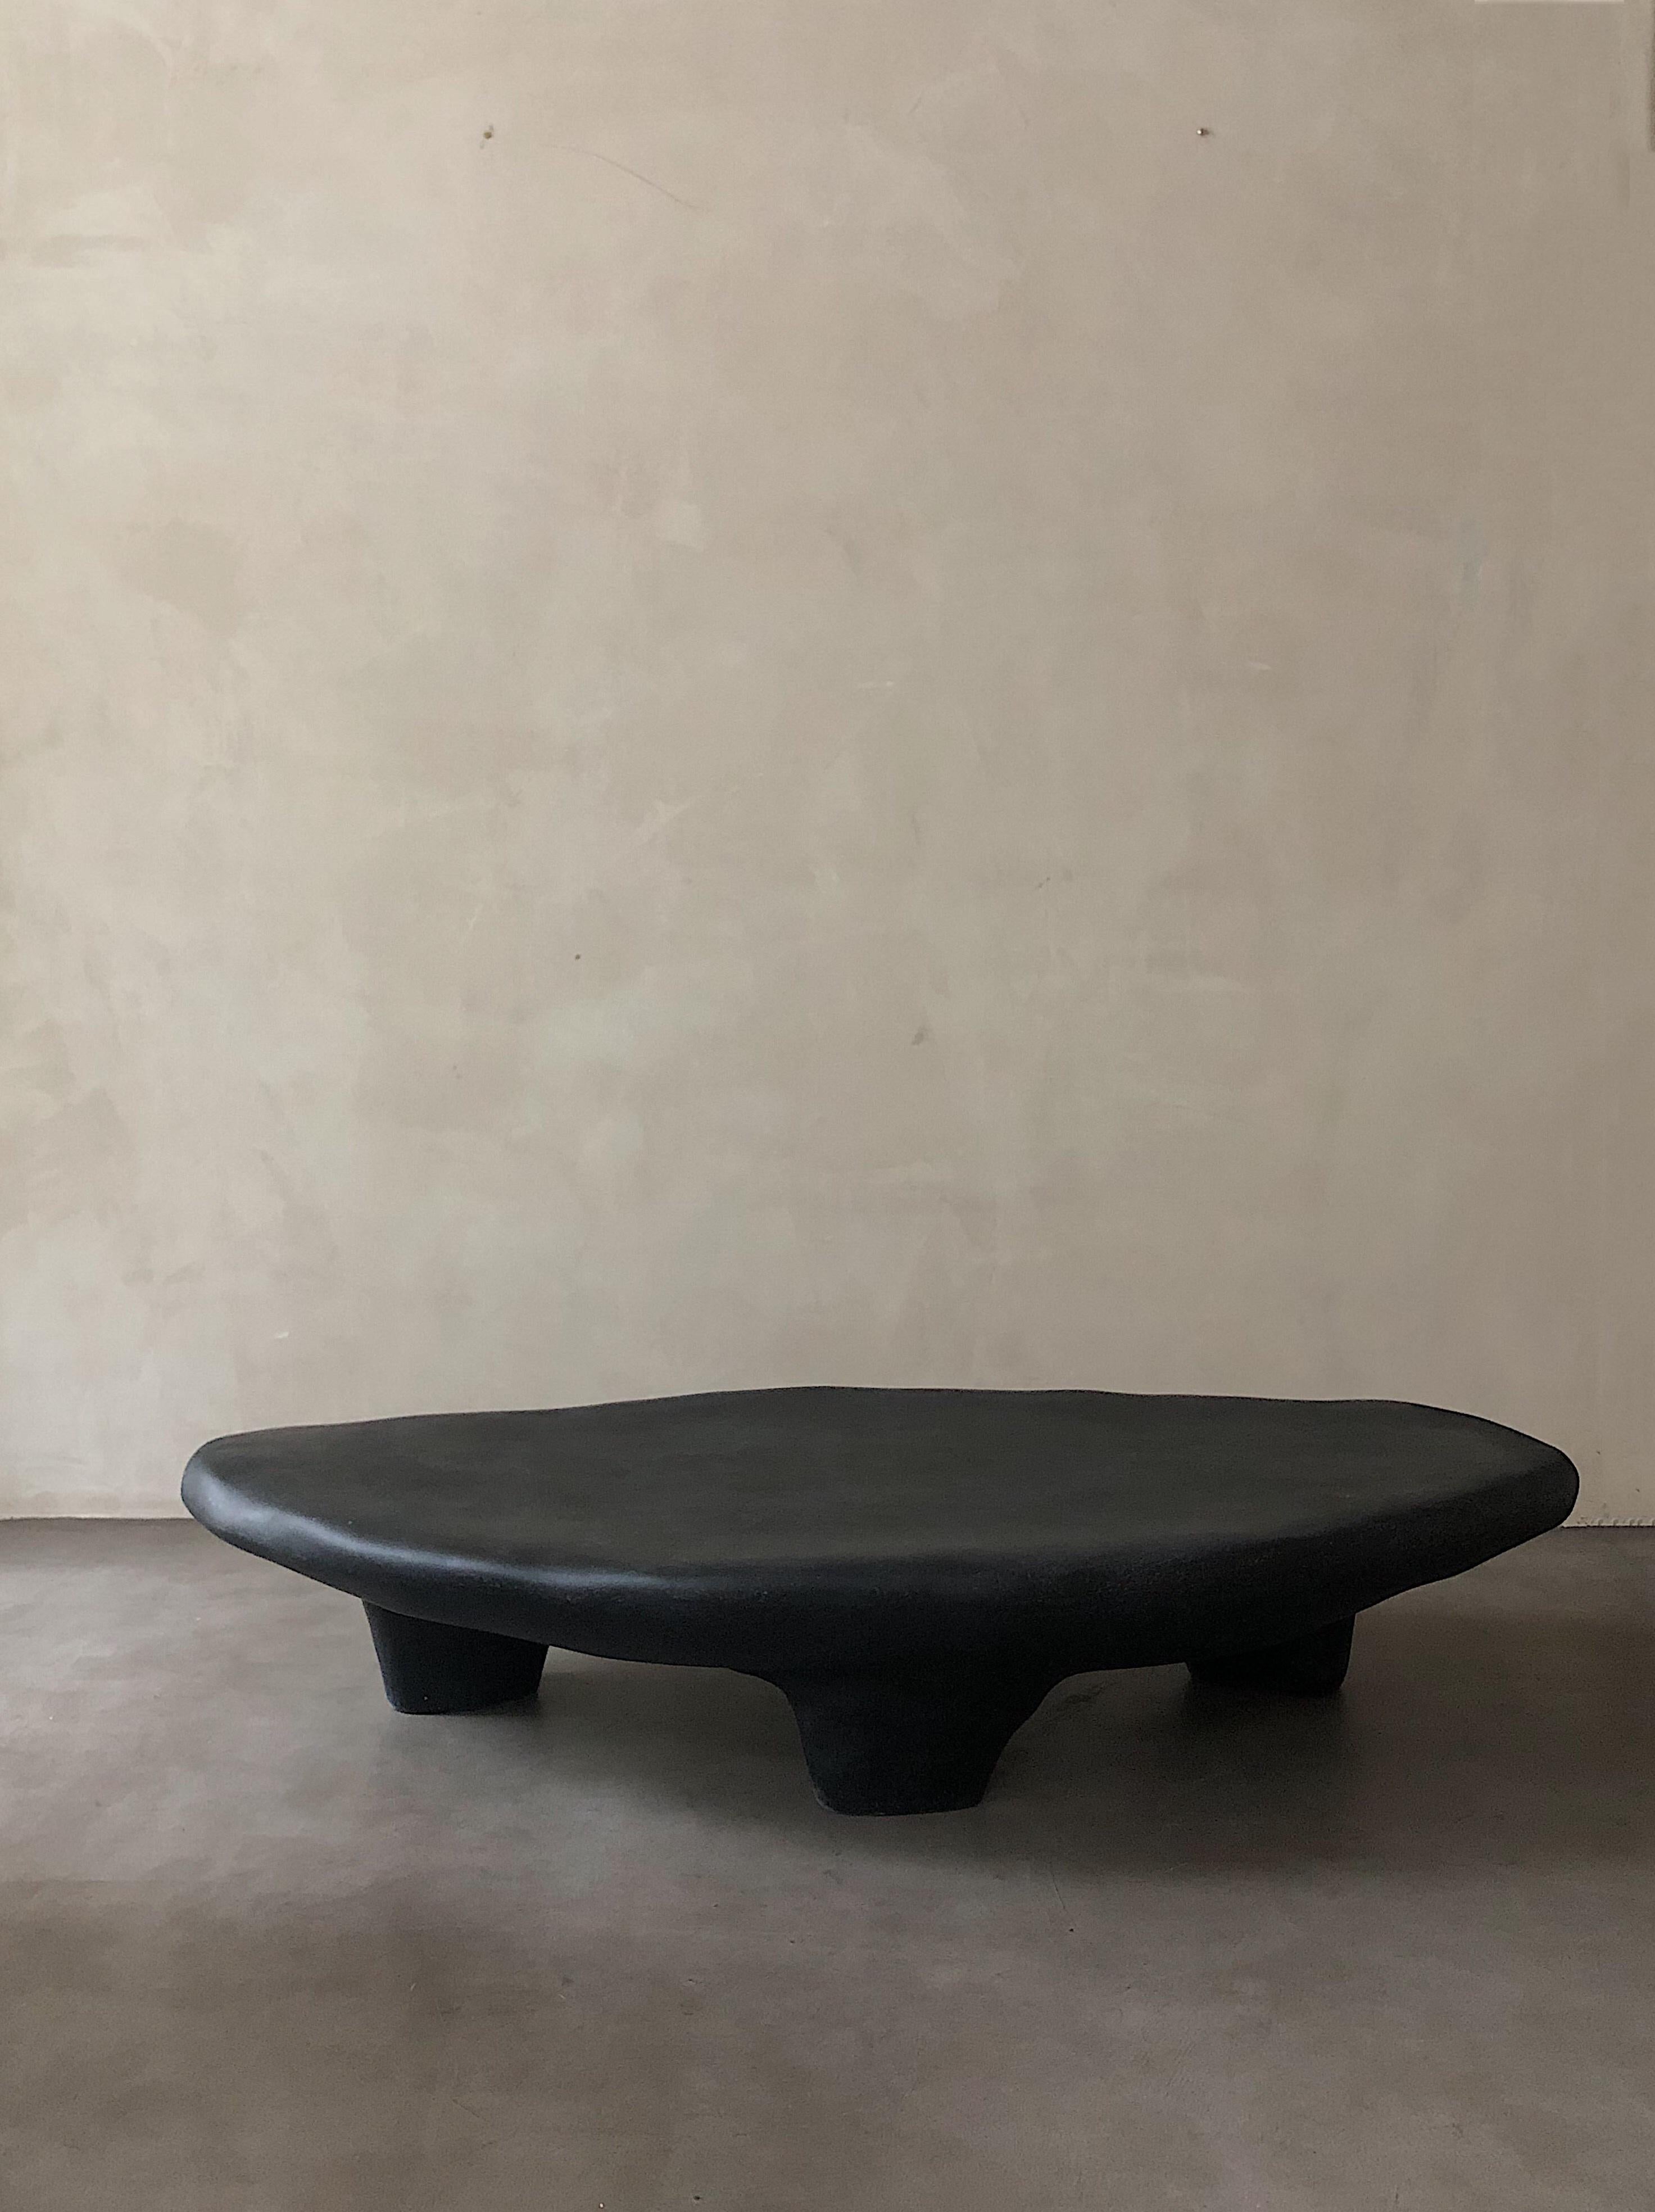 Black tripod coffee table by Karstudio
Materials: FRP
Dimensions: 150 x 85 x 30 cm

This piece is suitable for outdoor use.


Inspired by three-leg utensils which were the first creation of human being in ancient times. Triangle structure and the